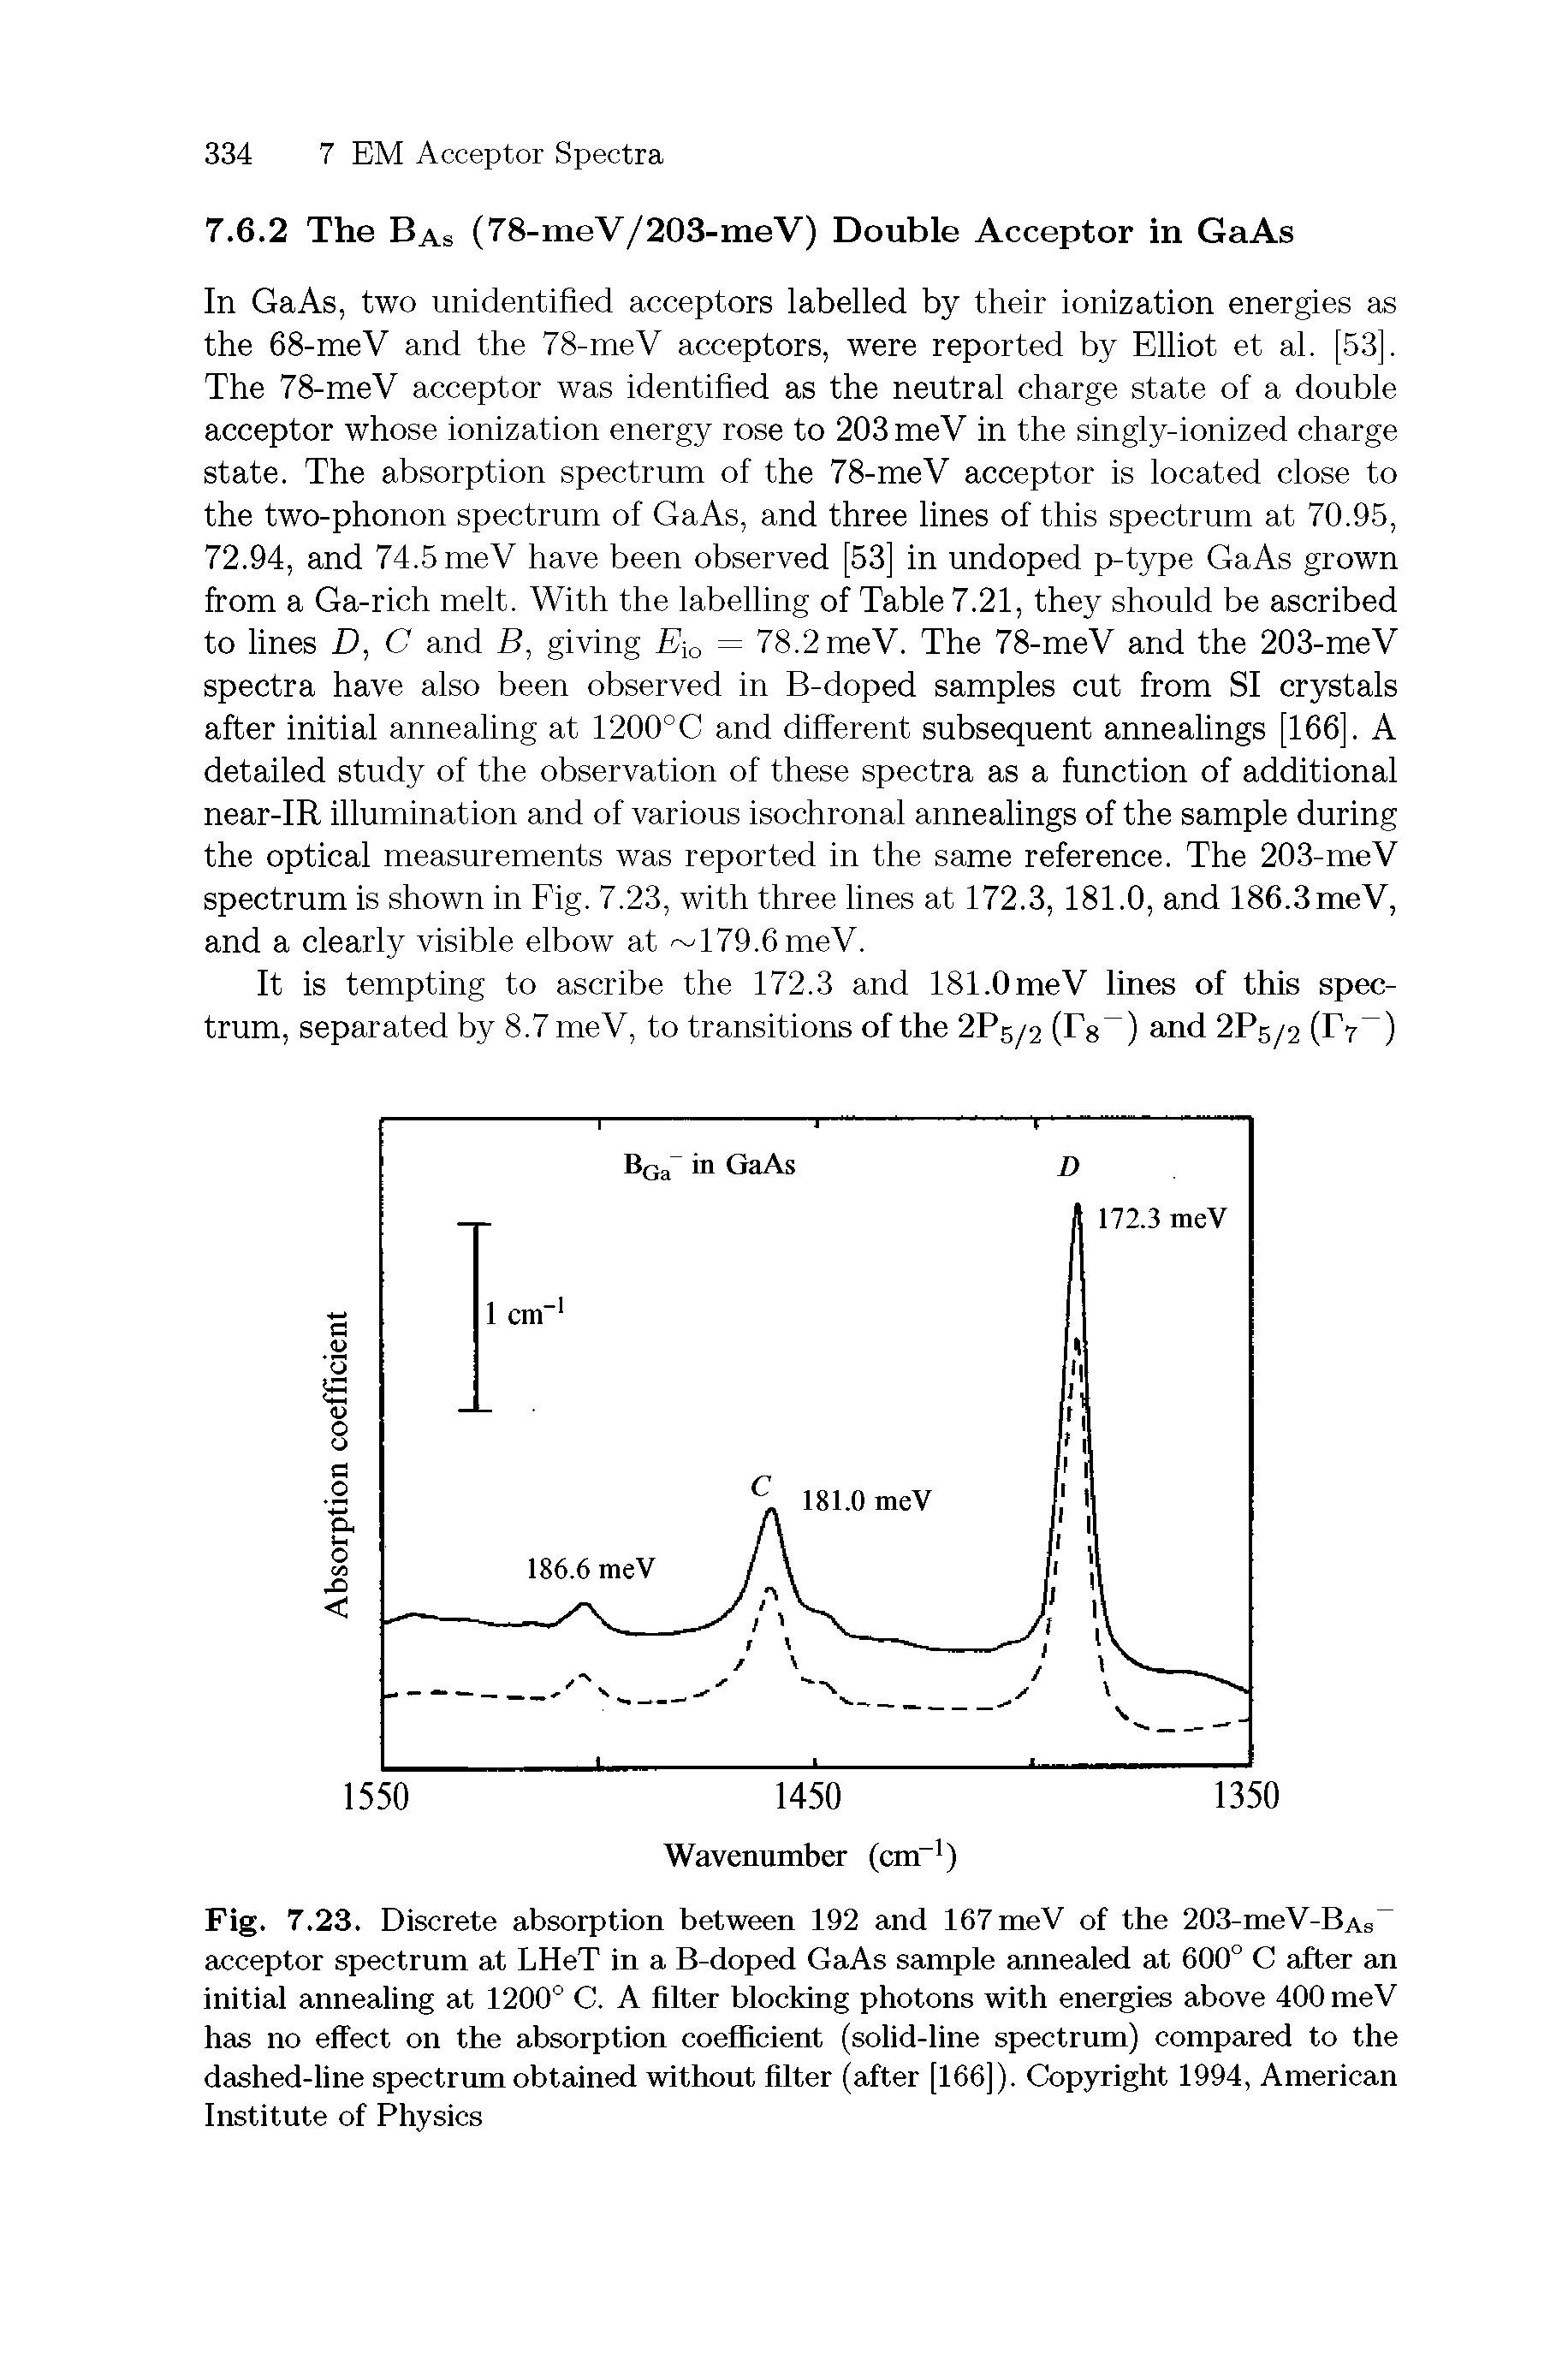 Fig. 7.23. Discrete absorption between 192 and 167 meV of the 203-meV-BAs acceptor spectrum at LHeT in a B-doped GaAs sample annealed at 600° C after an initial annealing at 1200° C. A filter blocking photons with energies above 400 meV has no effect on the absorption coefficient (solid-line spectrum) compared to the dashed-line spectrum obtained without filter (after [166]). Copyright 1994, American Institute of Physics...